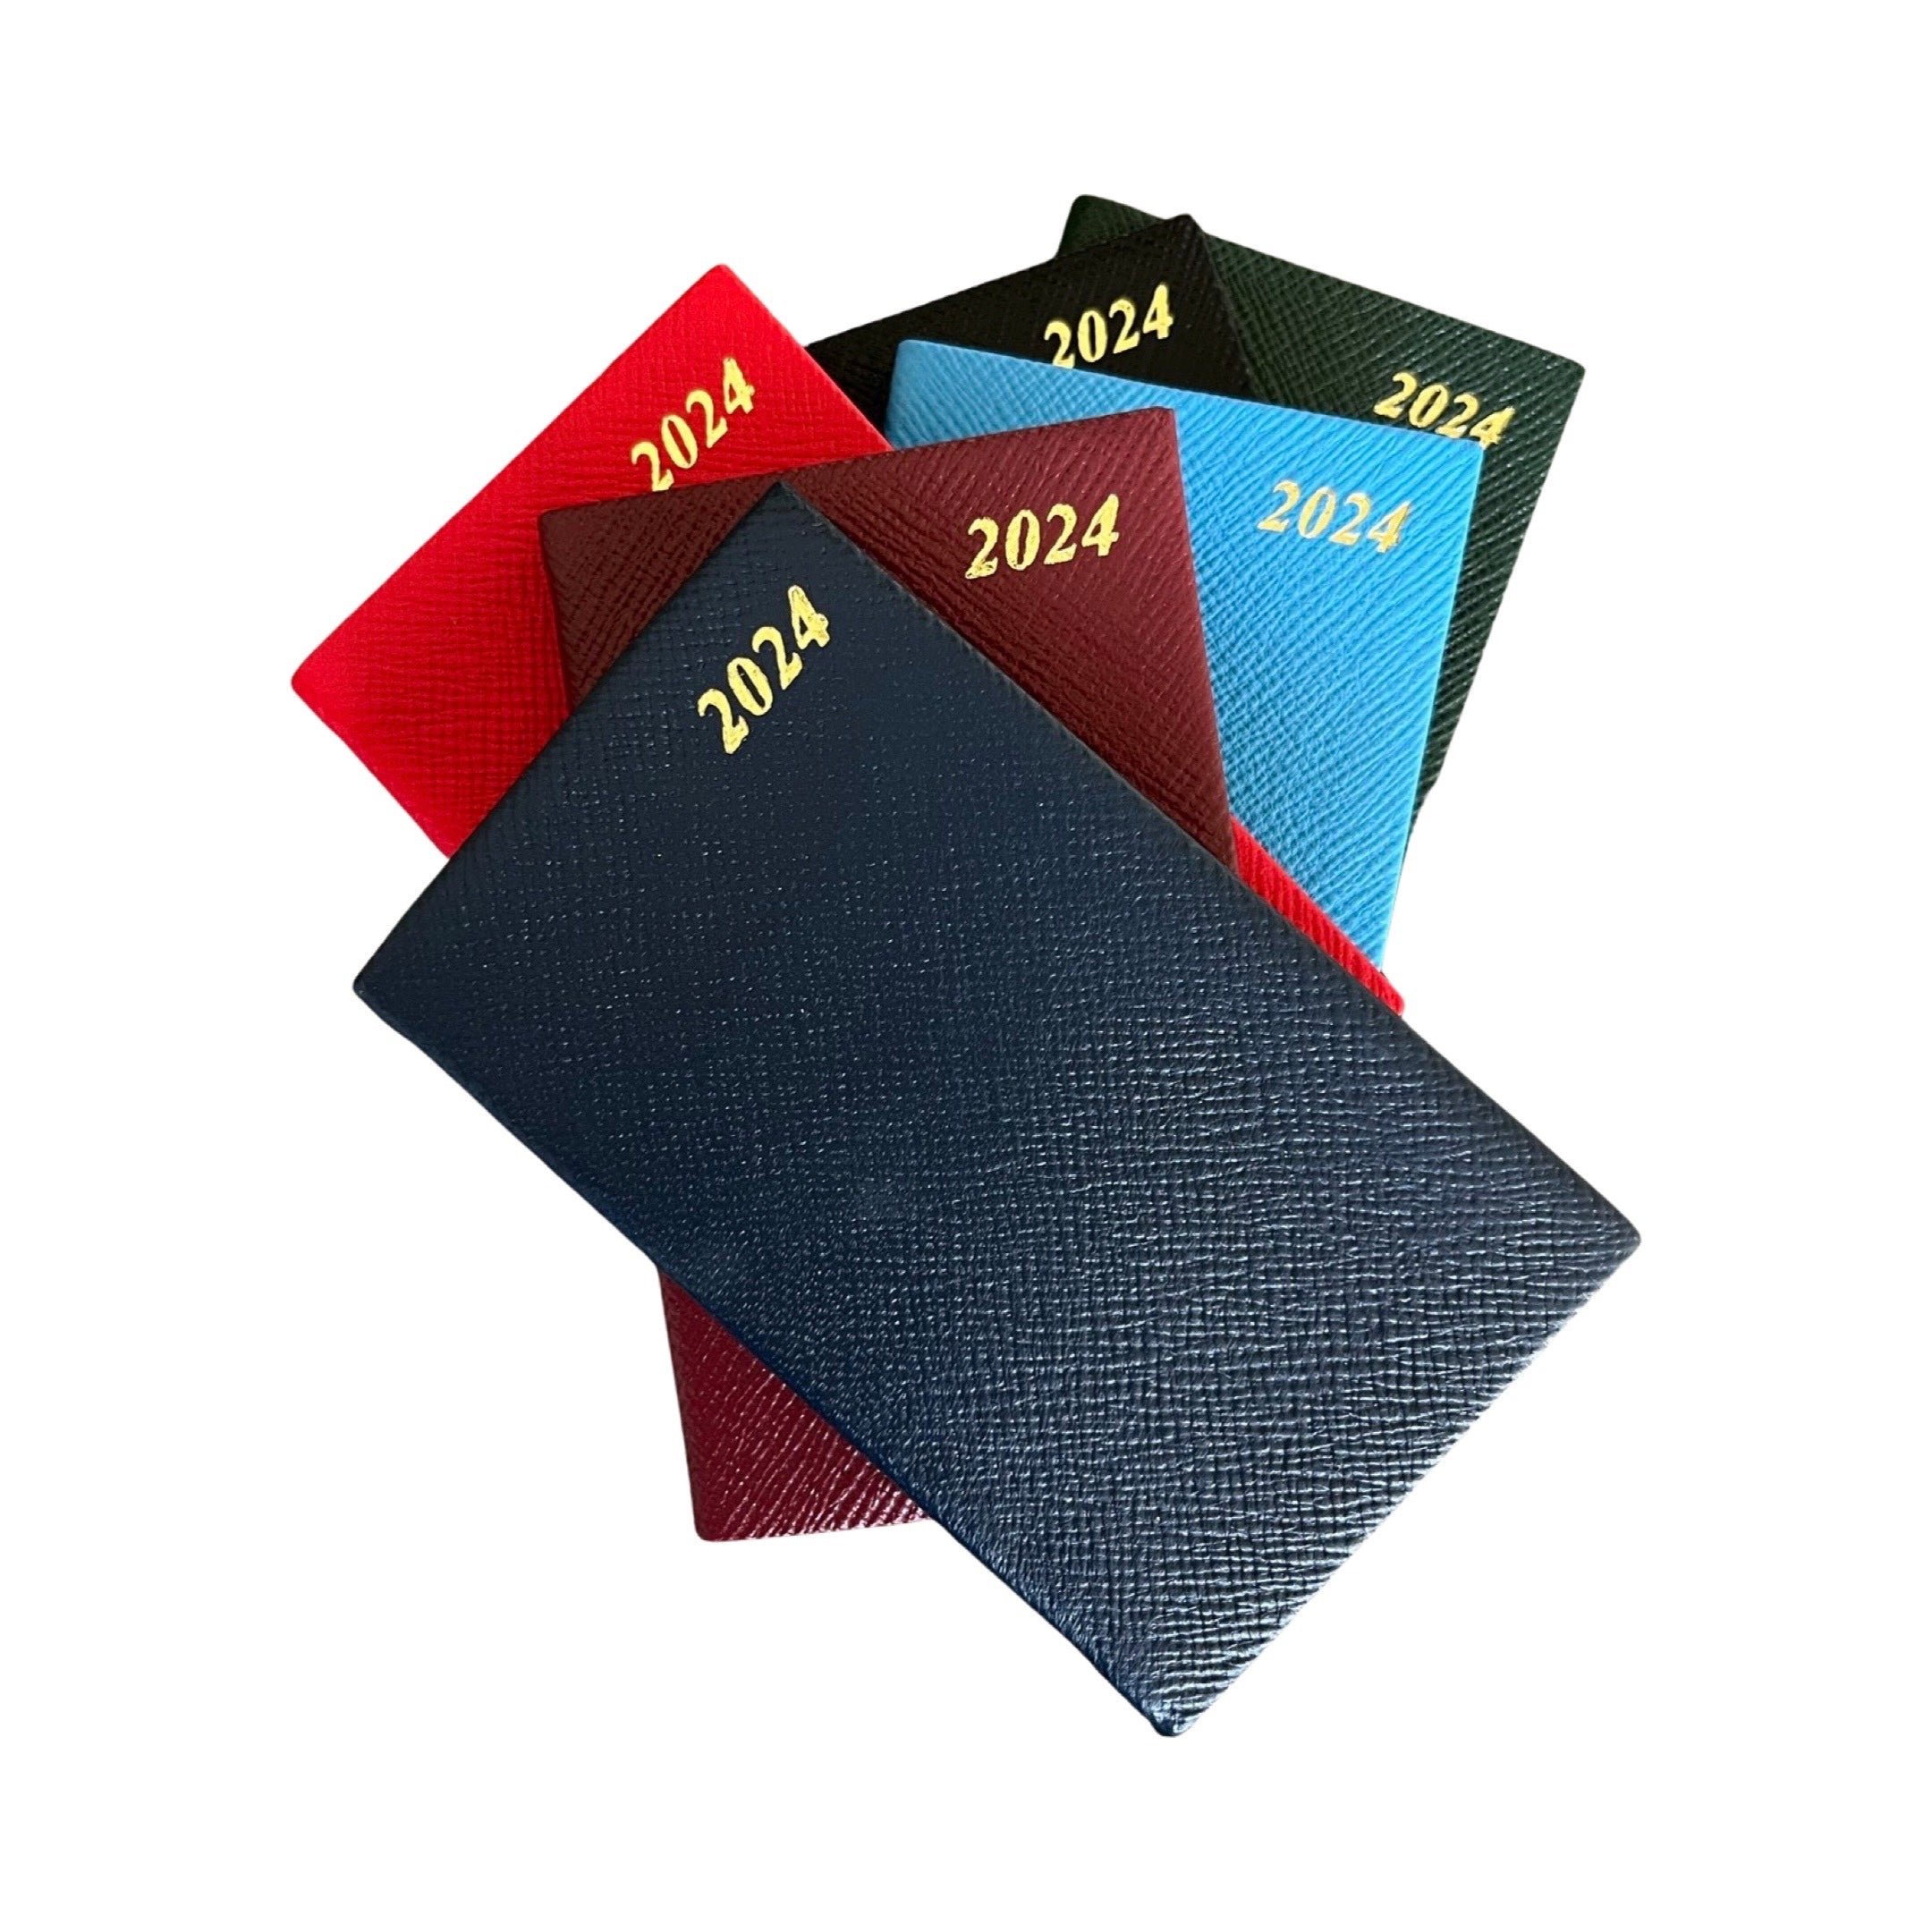 Charing Cross Leather Calendars Leather Notebooks Guest Books